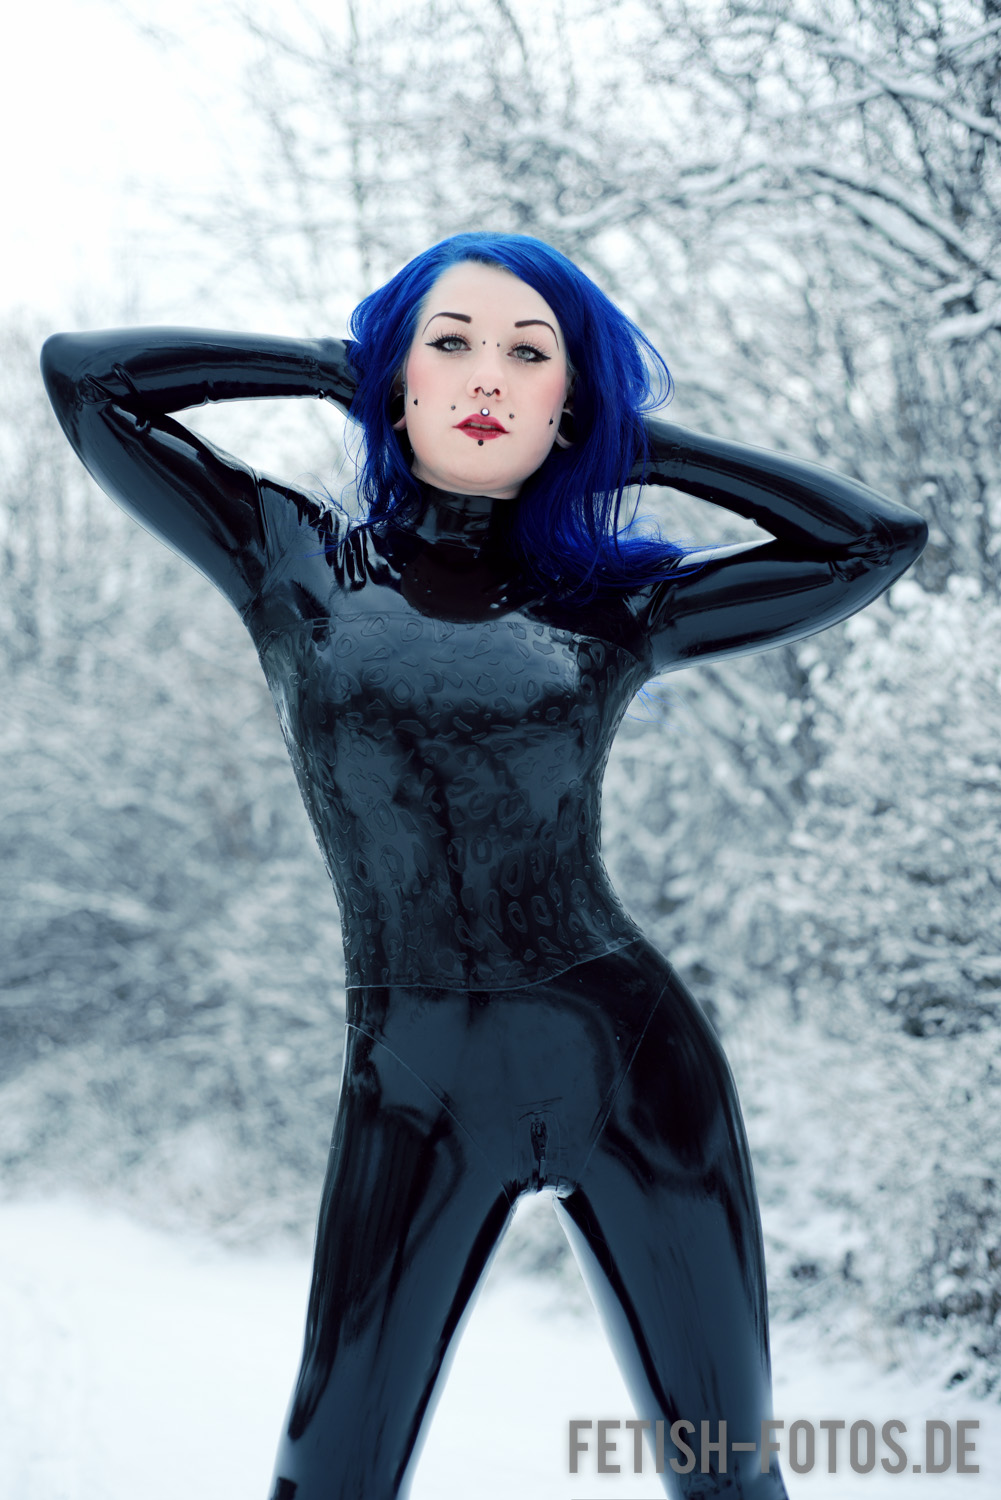 Latex catsuit in the snow